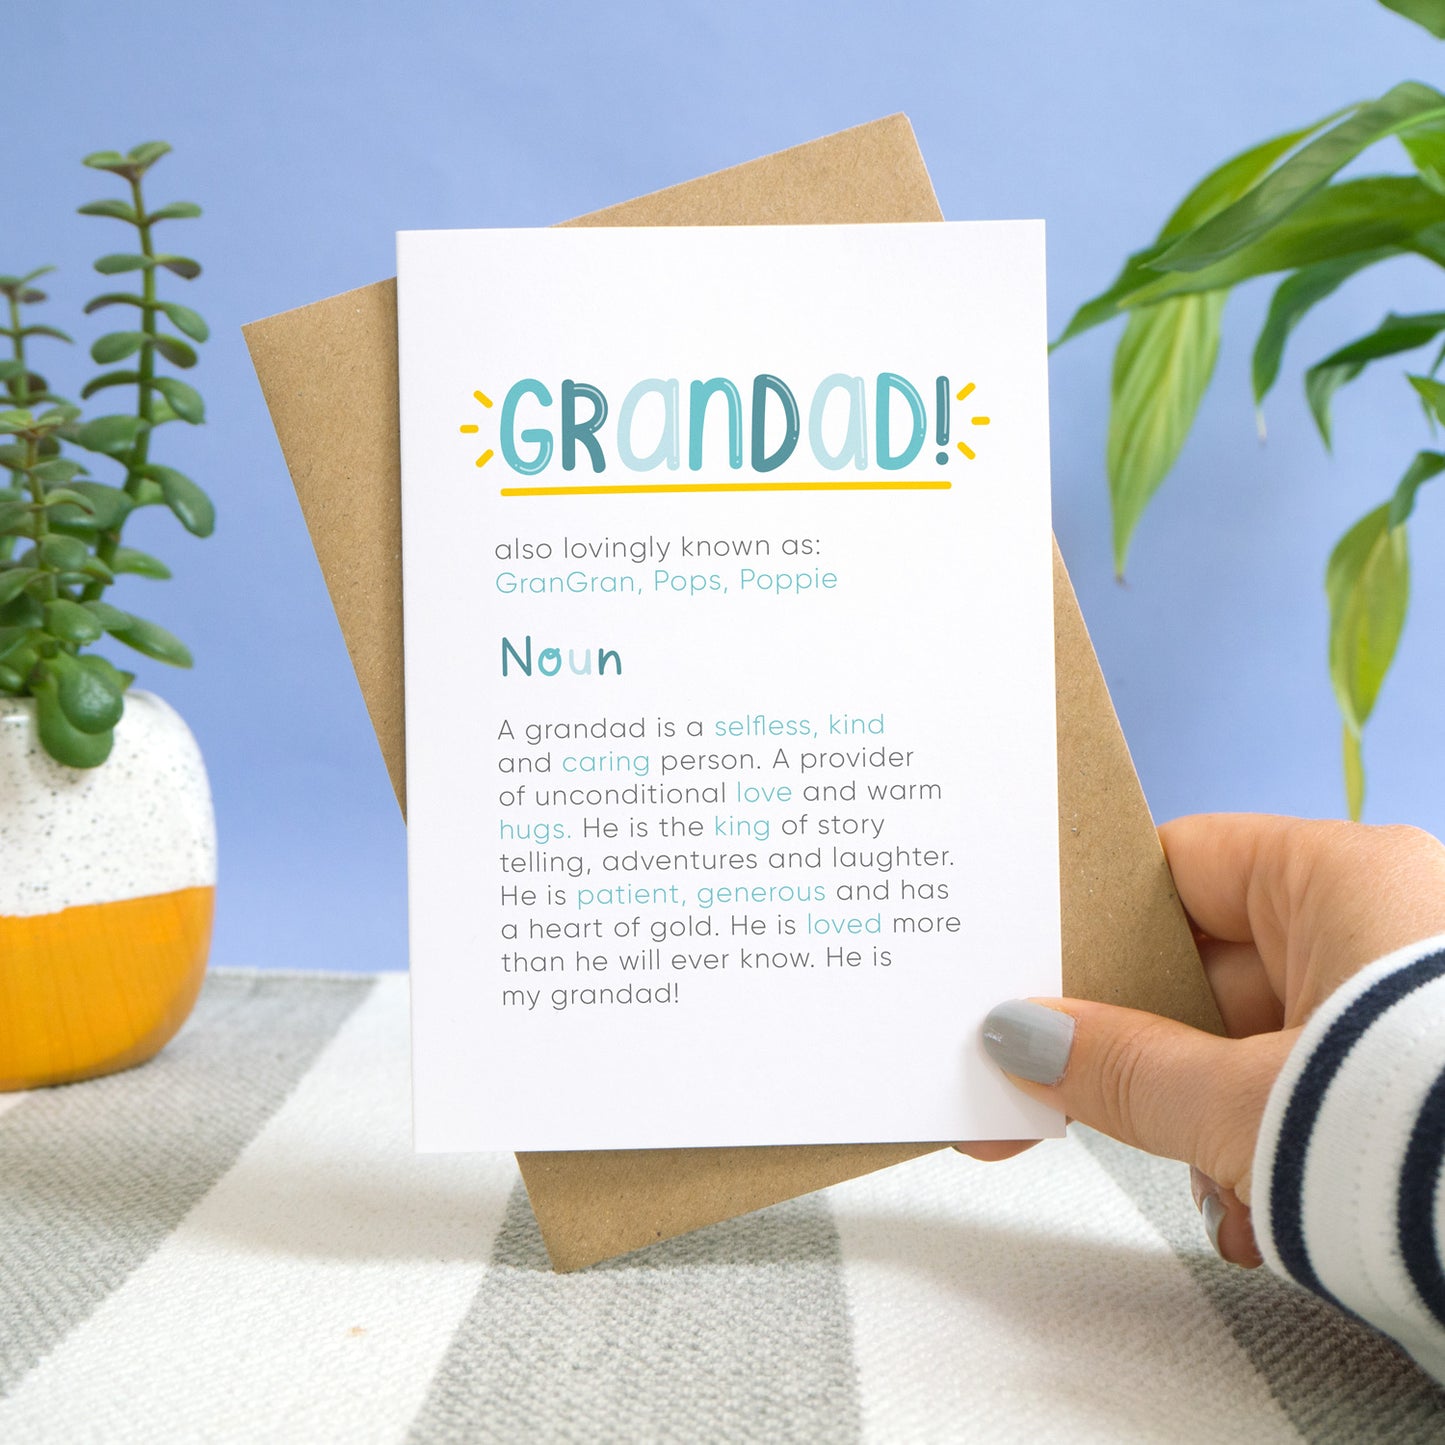 A grandad definition card being held over a stripy carpet and a blue background with potted plants behind. The card shows Grandad in bold lettering with the personalised nicknames underneath, followed by the definition.